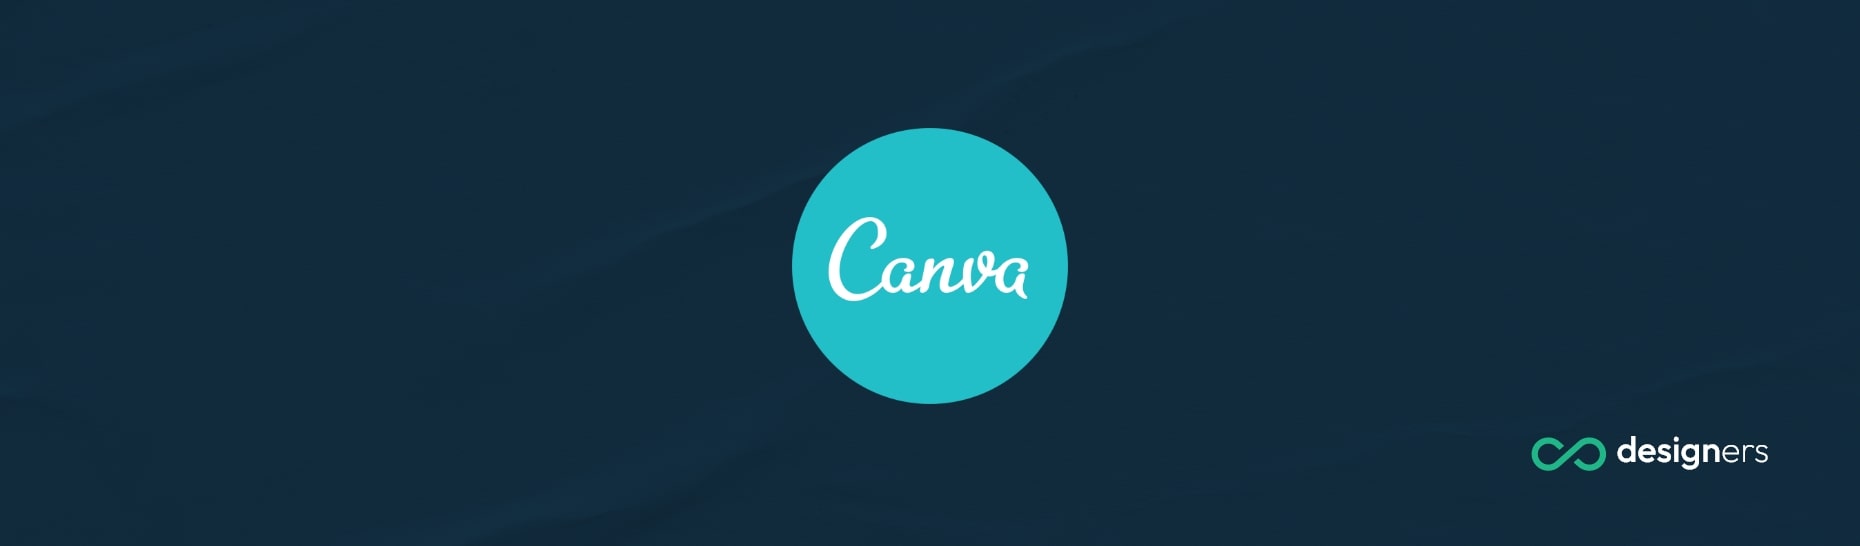 How Do I Change the Transparency in Canva? 